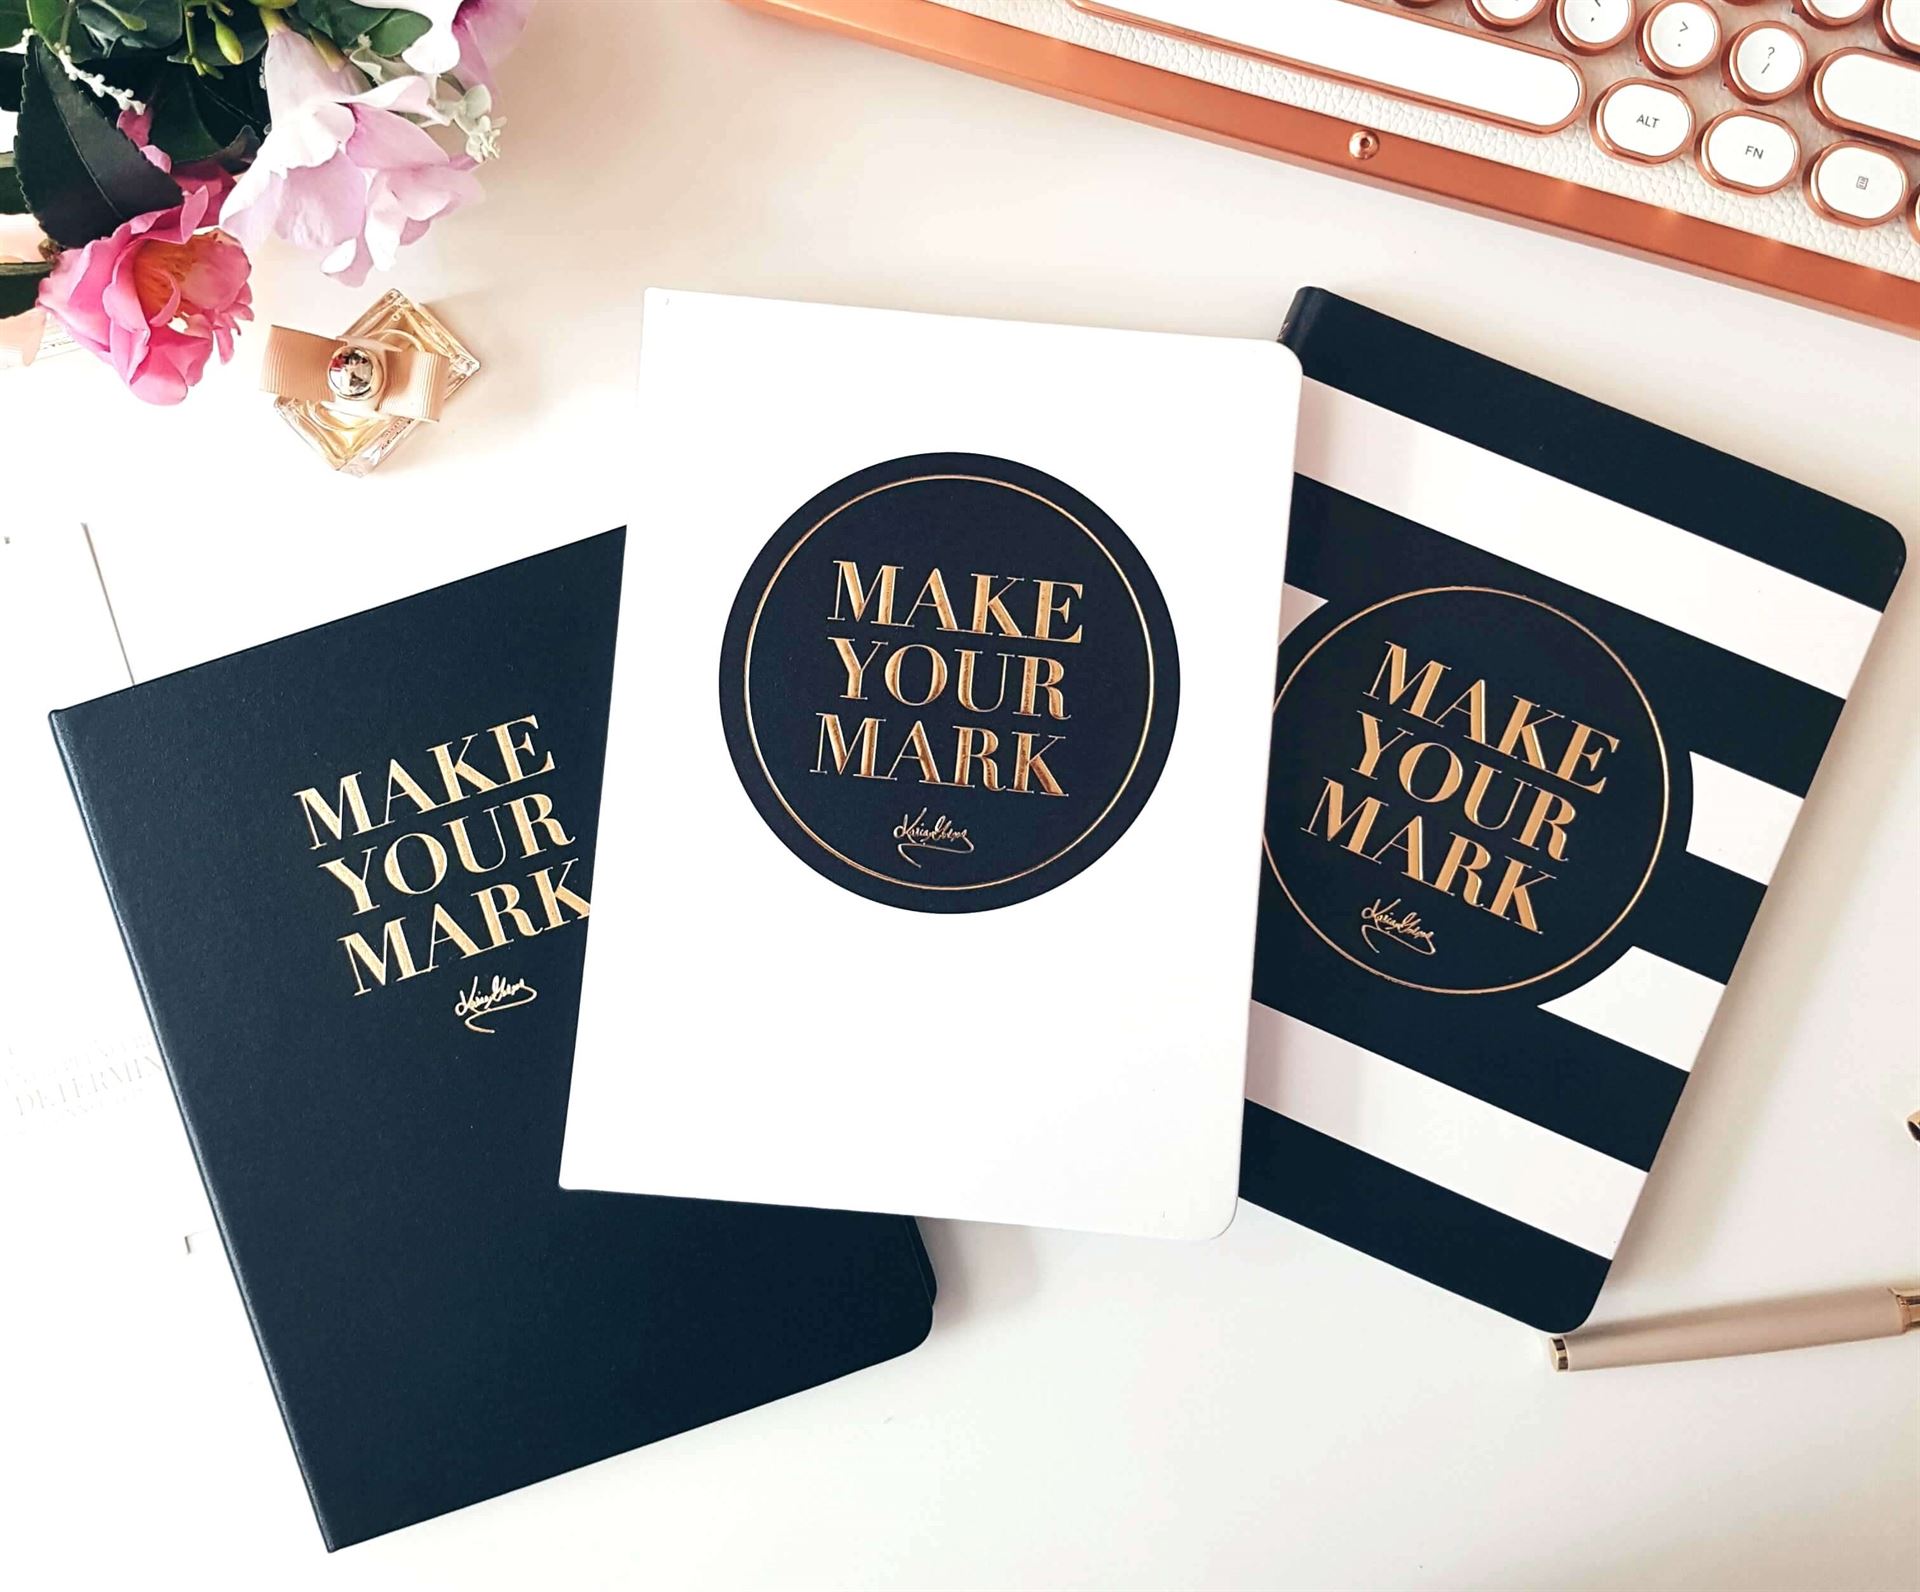 Make your Mark self coaching journal from Leaders in Heels